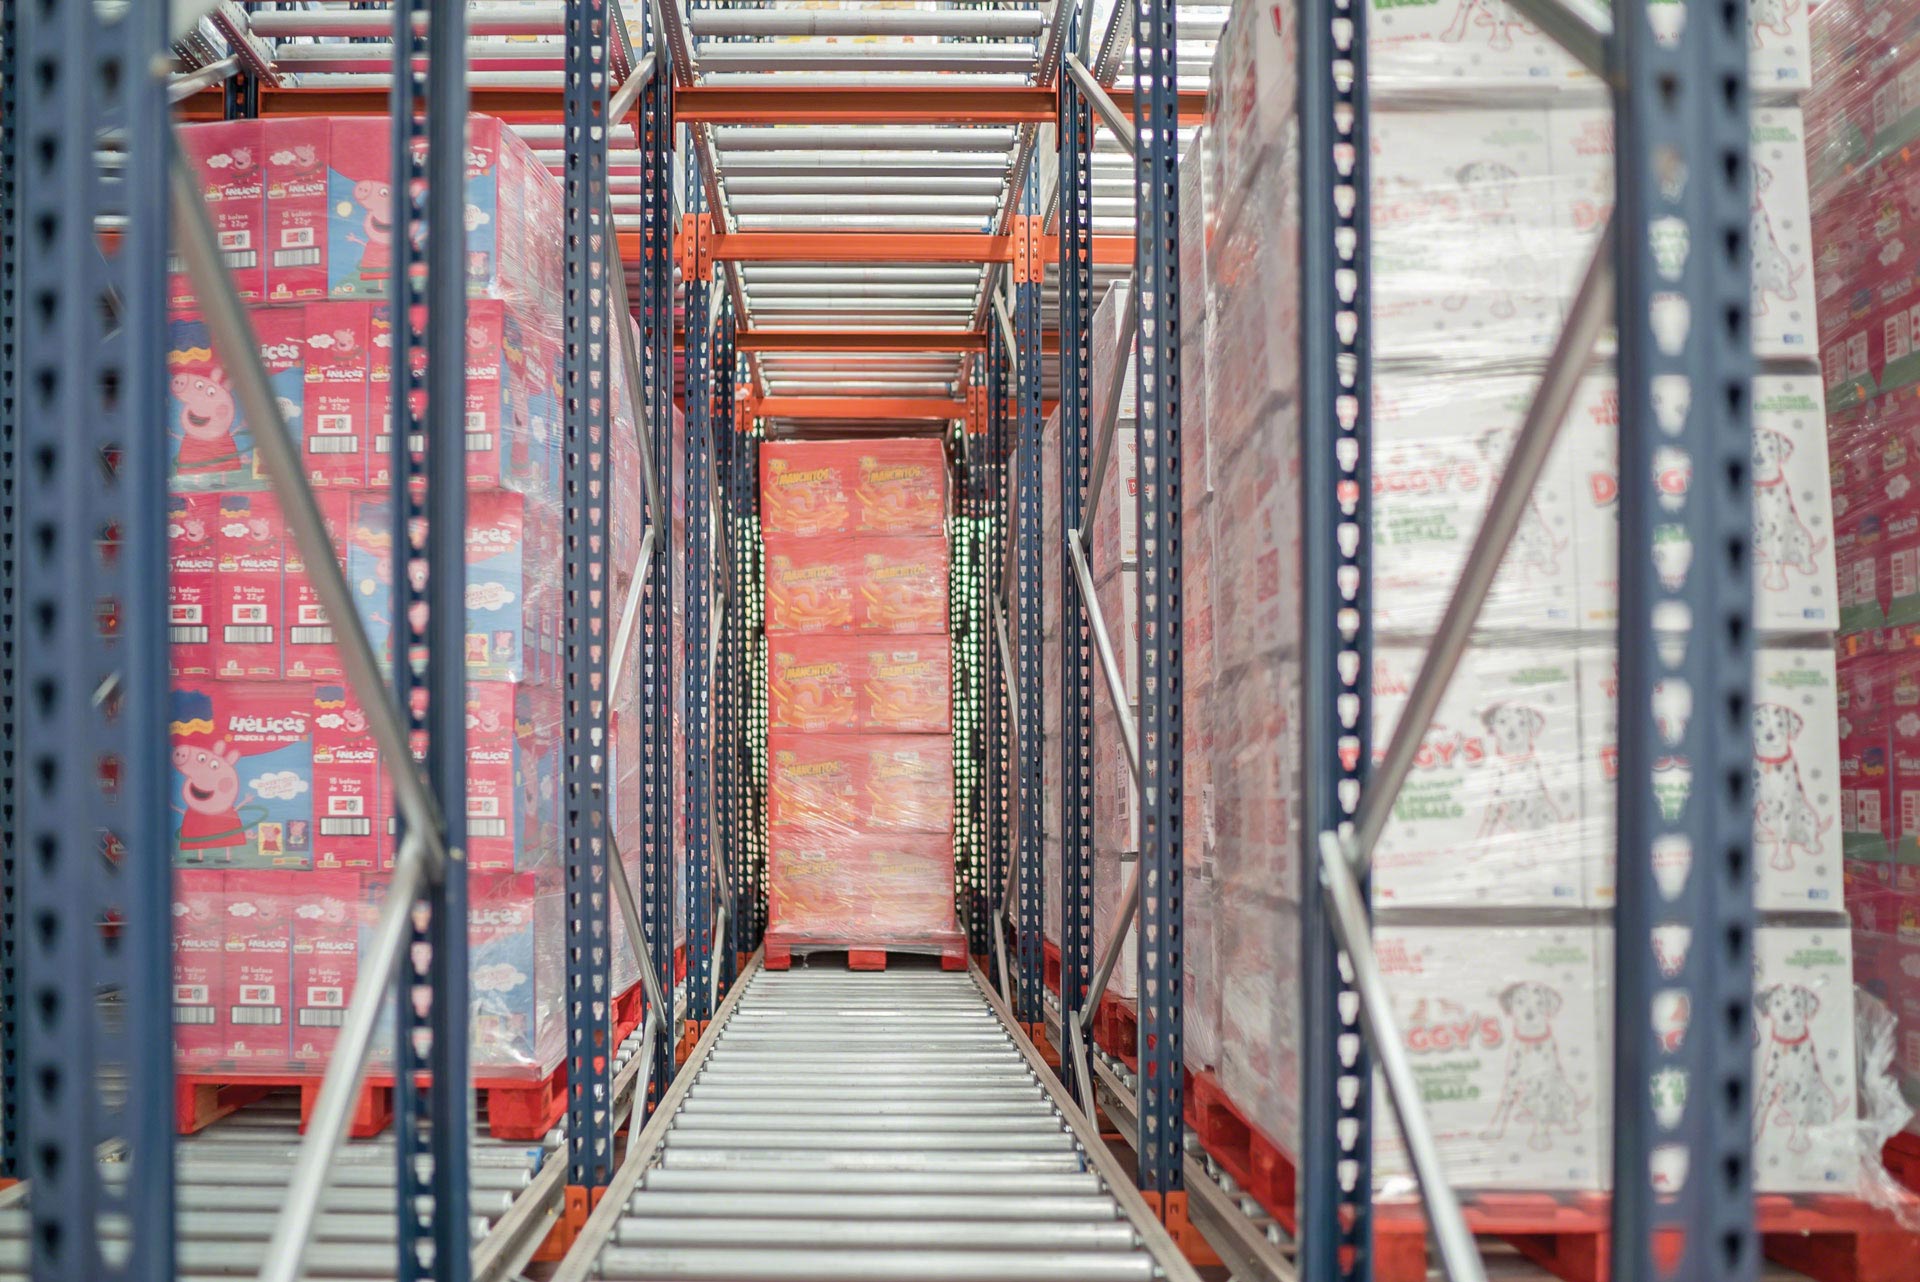 The pallets slide inside the storage channels of the pallet flow rack by gravity